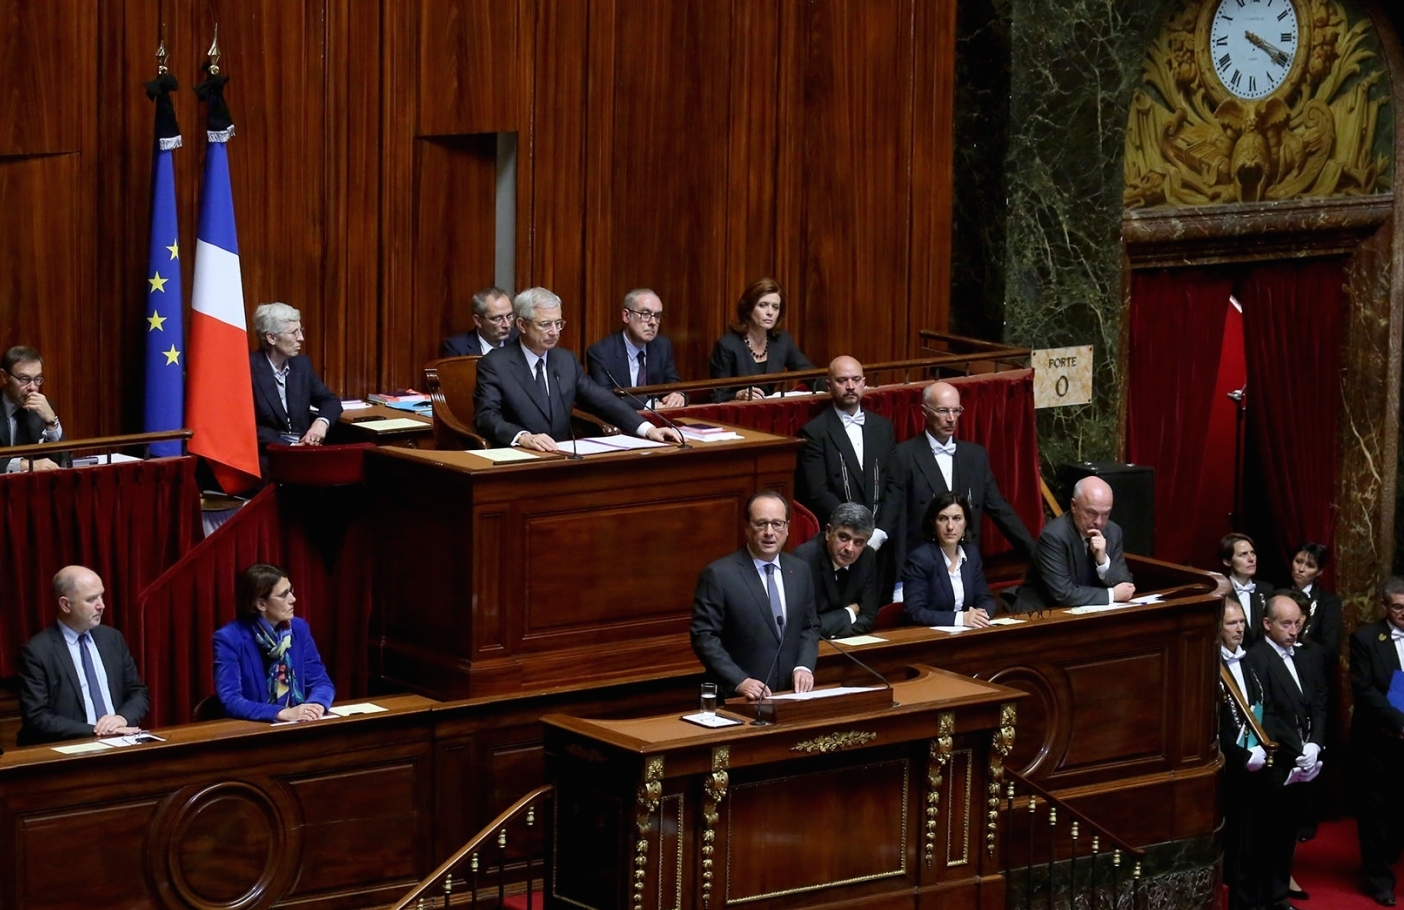 Hollande announced the modification of the constitution in an address to parliament (photo credit: French Presidency)